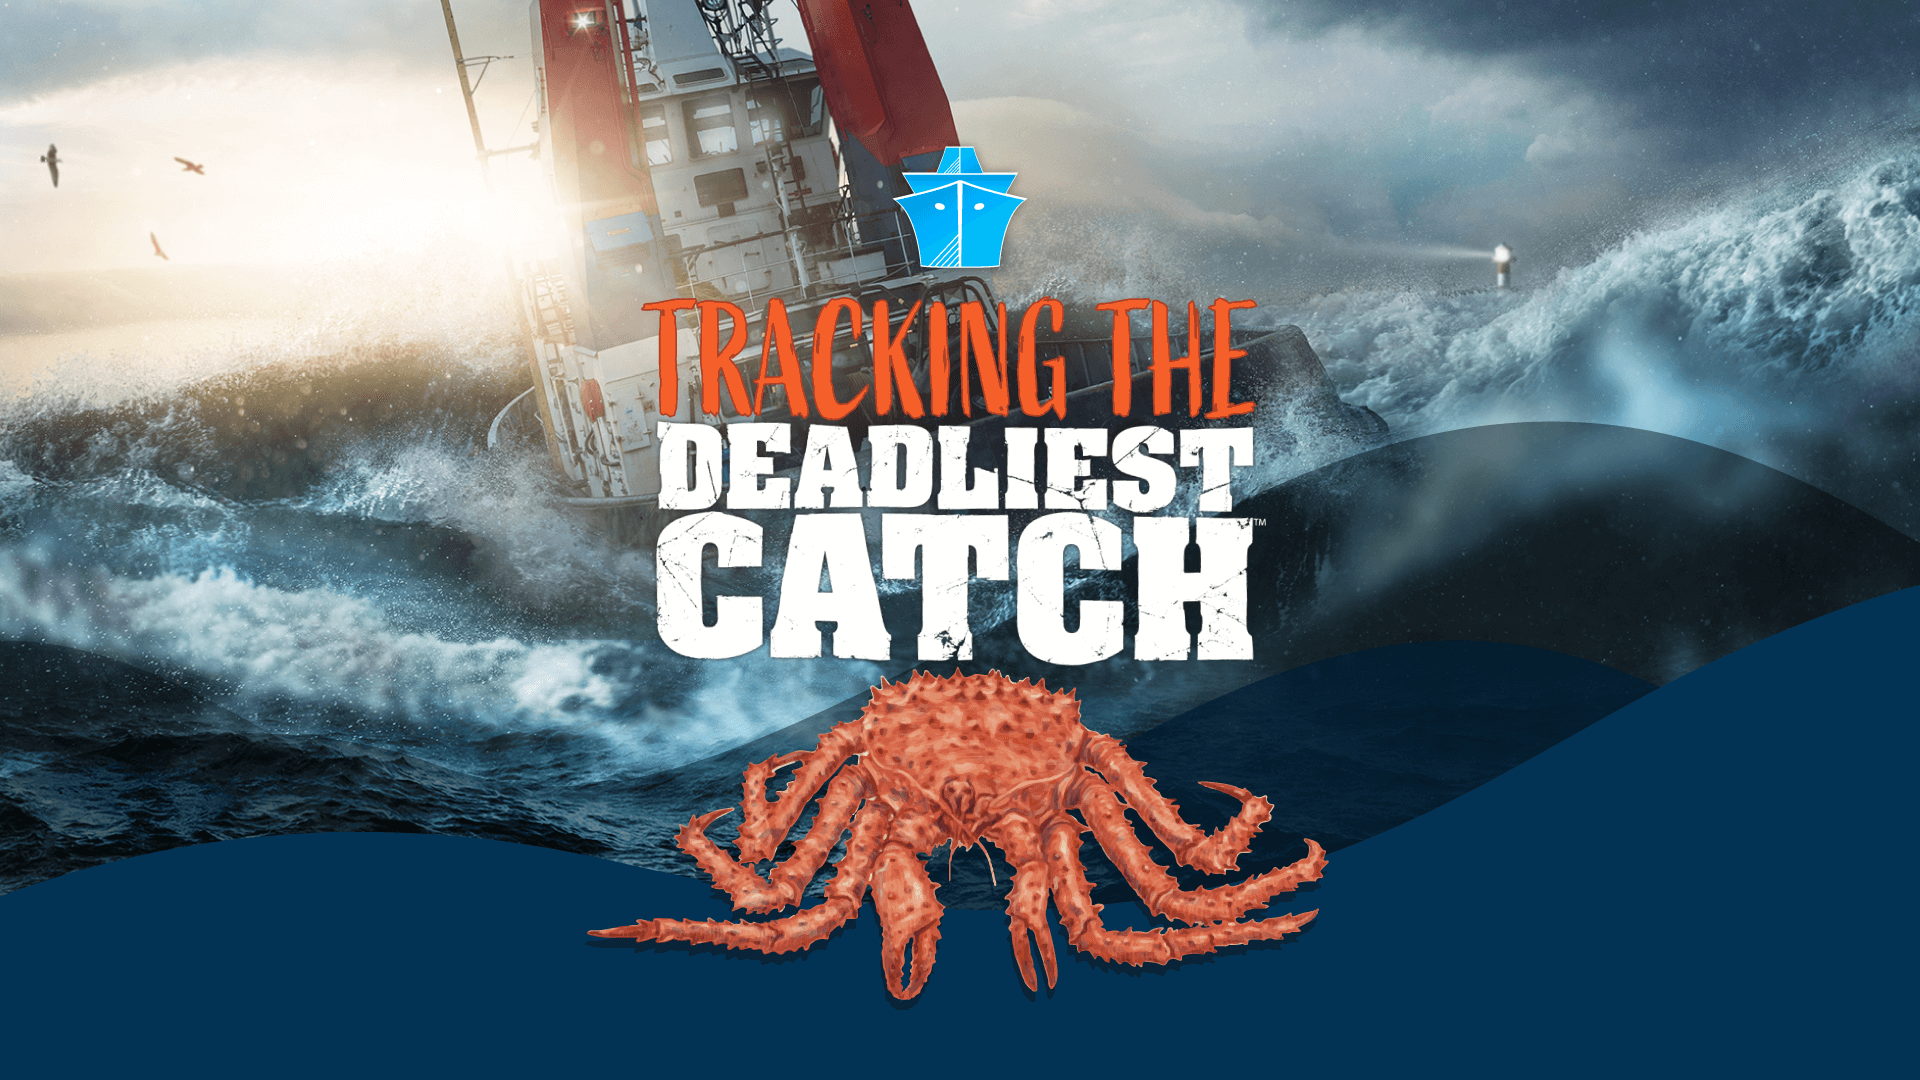 Tracking the Deadliest Catch infographic